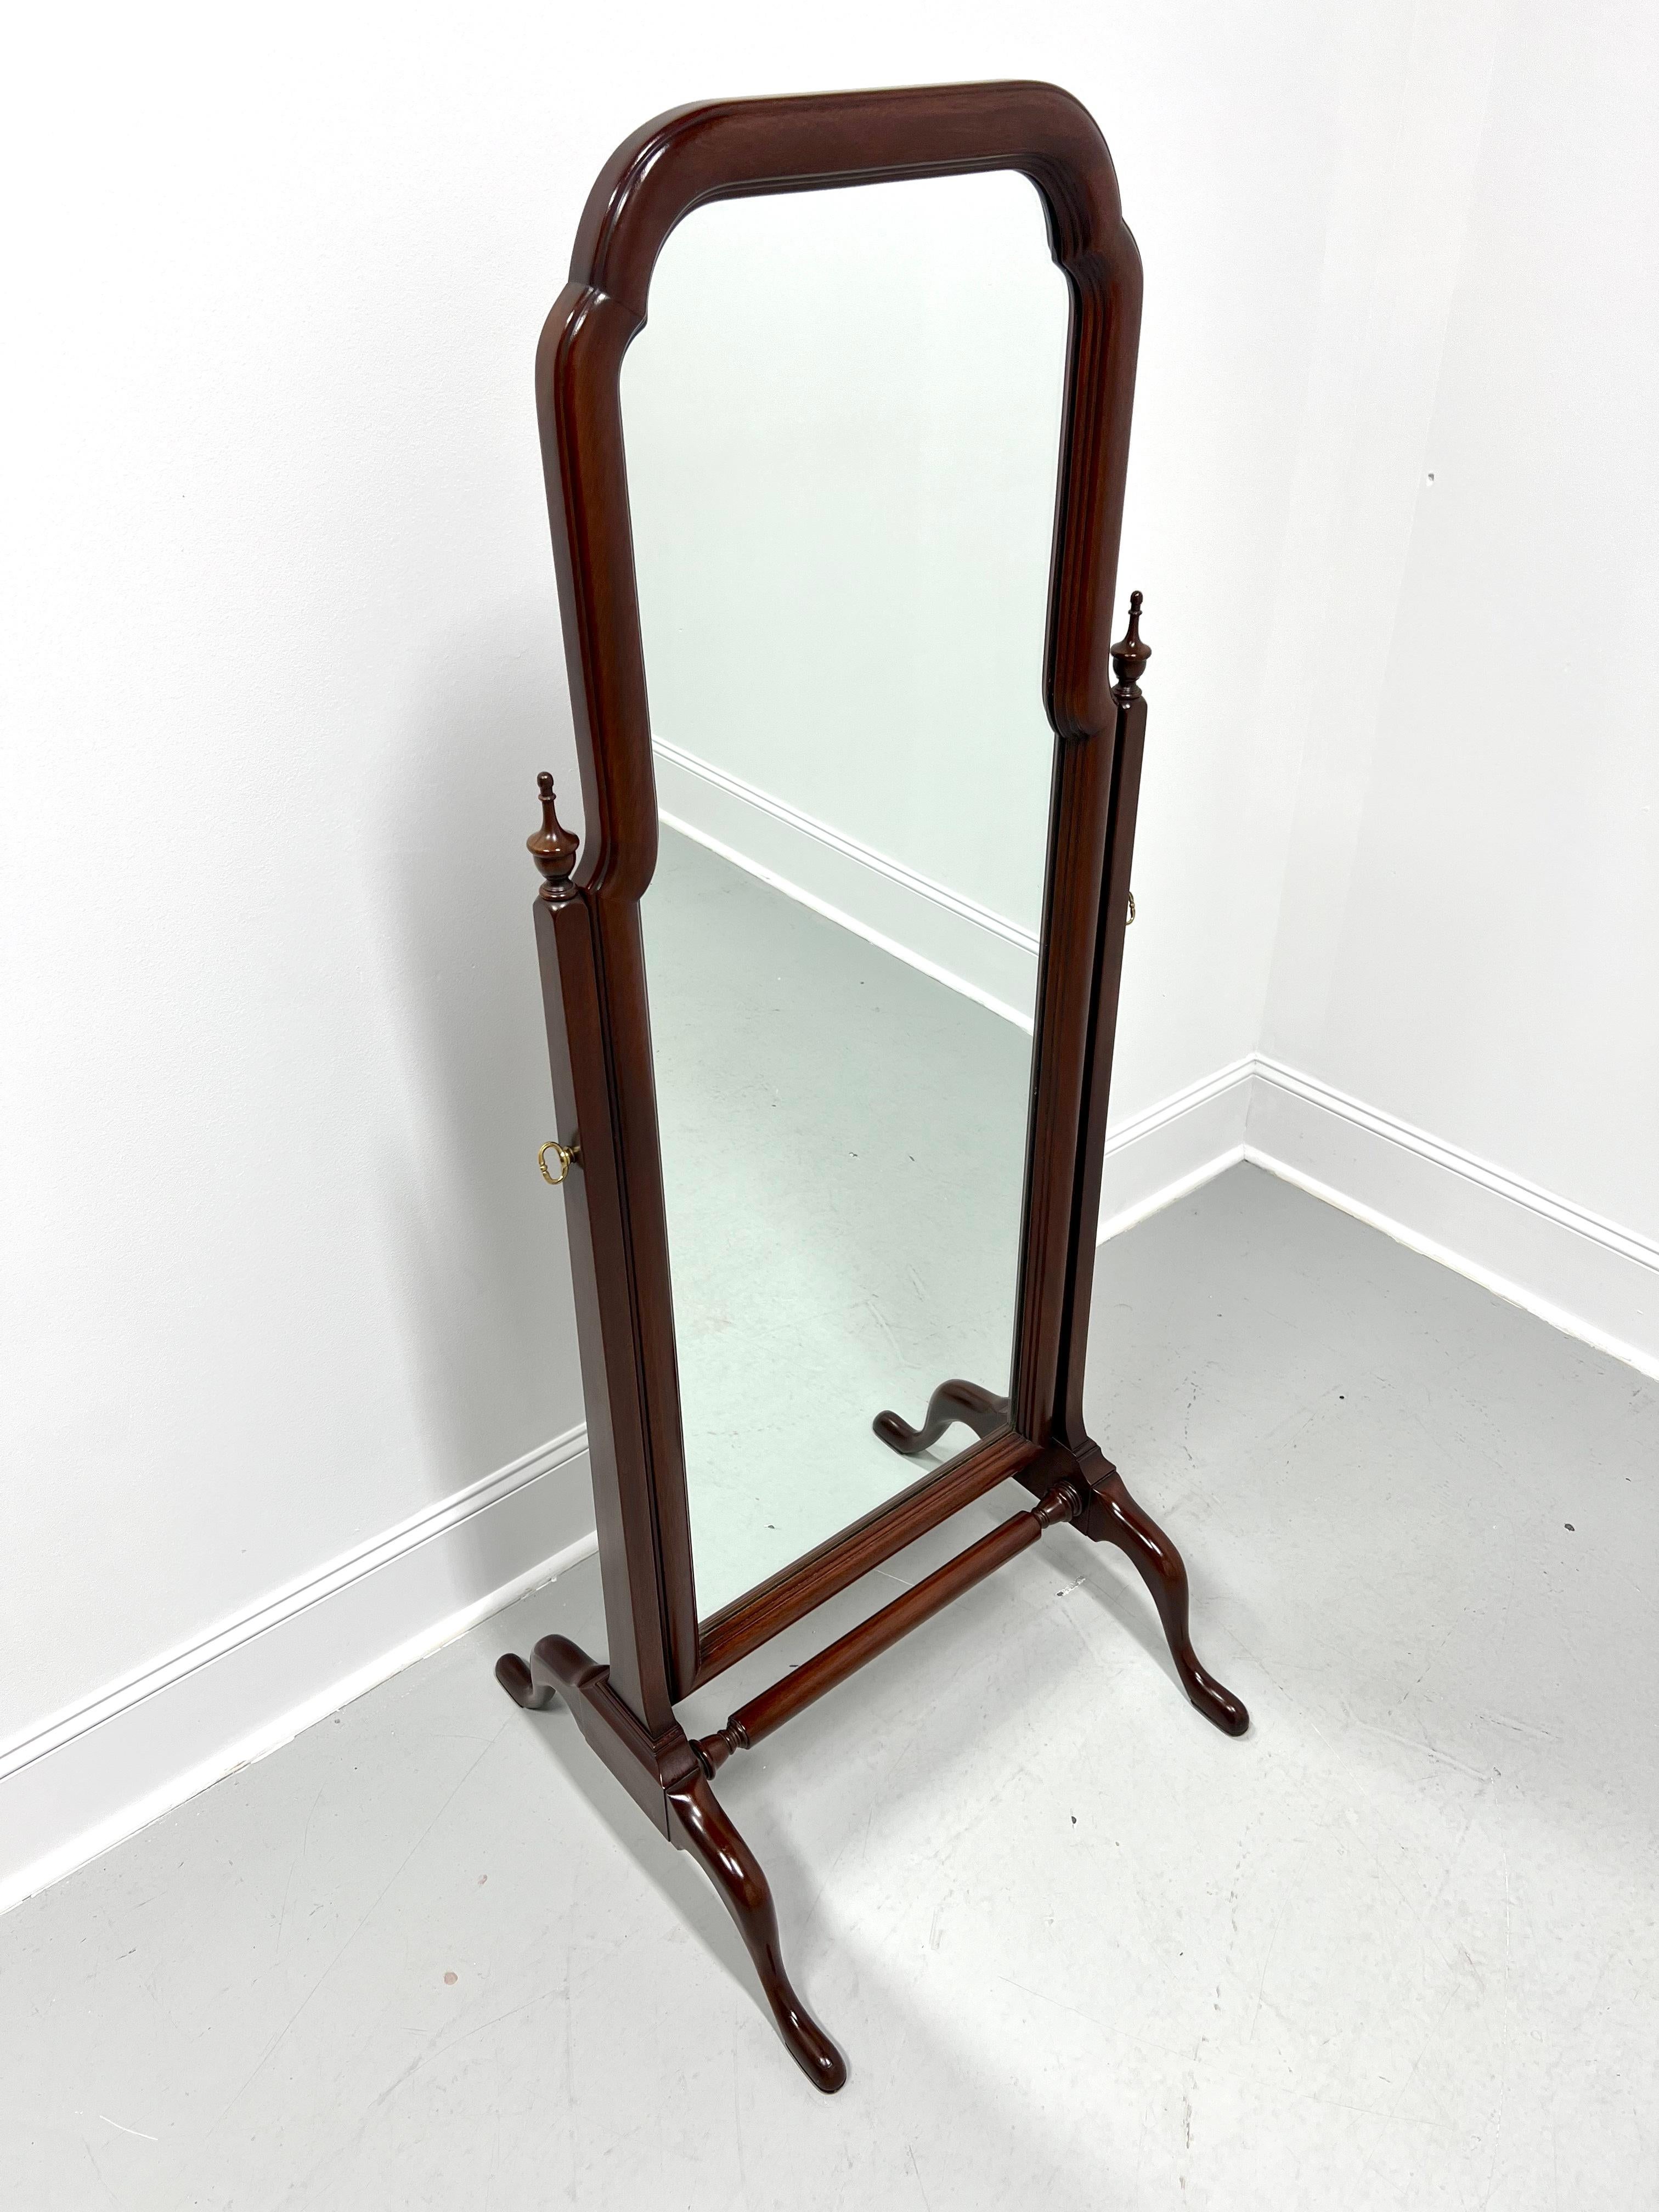 A Queen Anne style freestanding cheval dressing mirror by Henkel Harris, of Winchester, Virginia, USA. Full length mirrored glass in a solid mahogany wood frame with arched top, attached by decorative brass pivot screws to post-like sides capped by